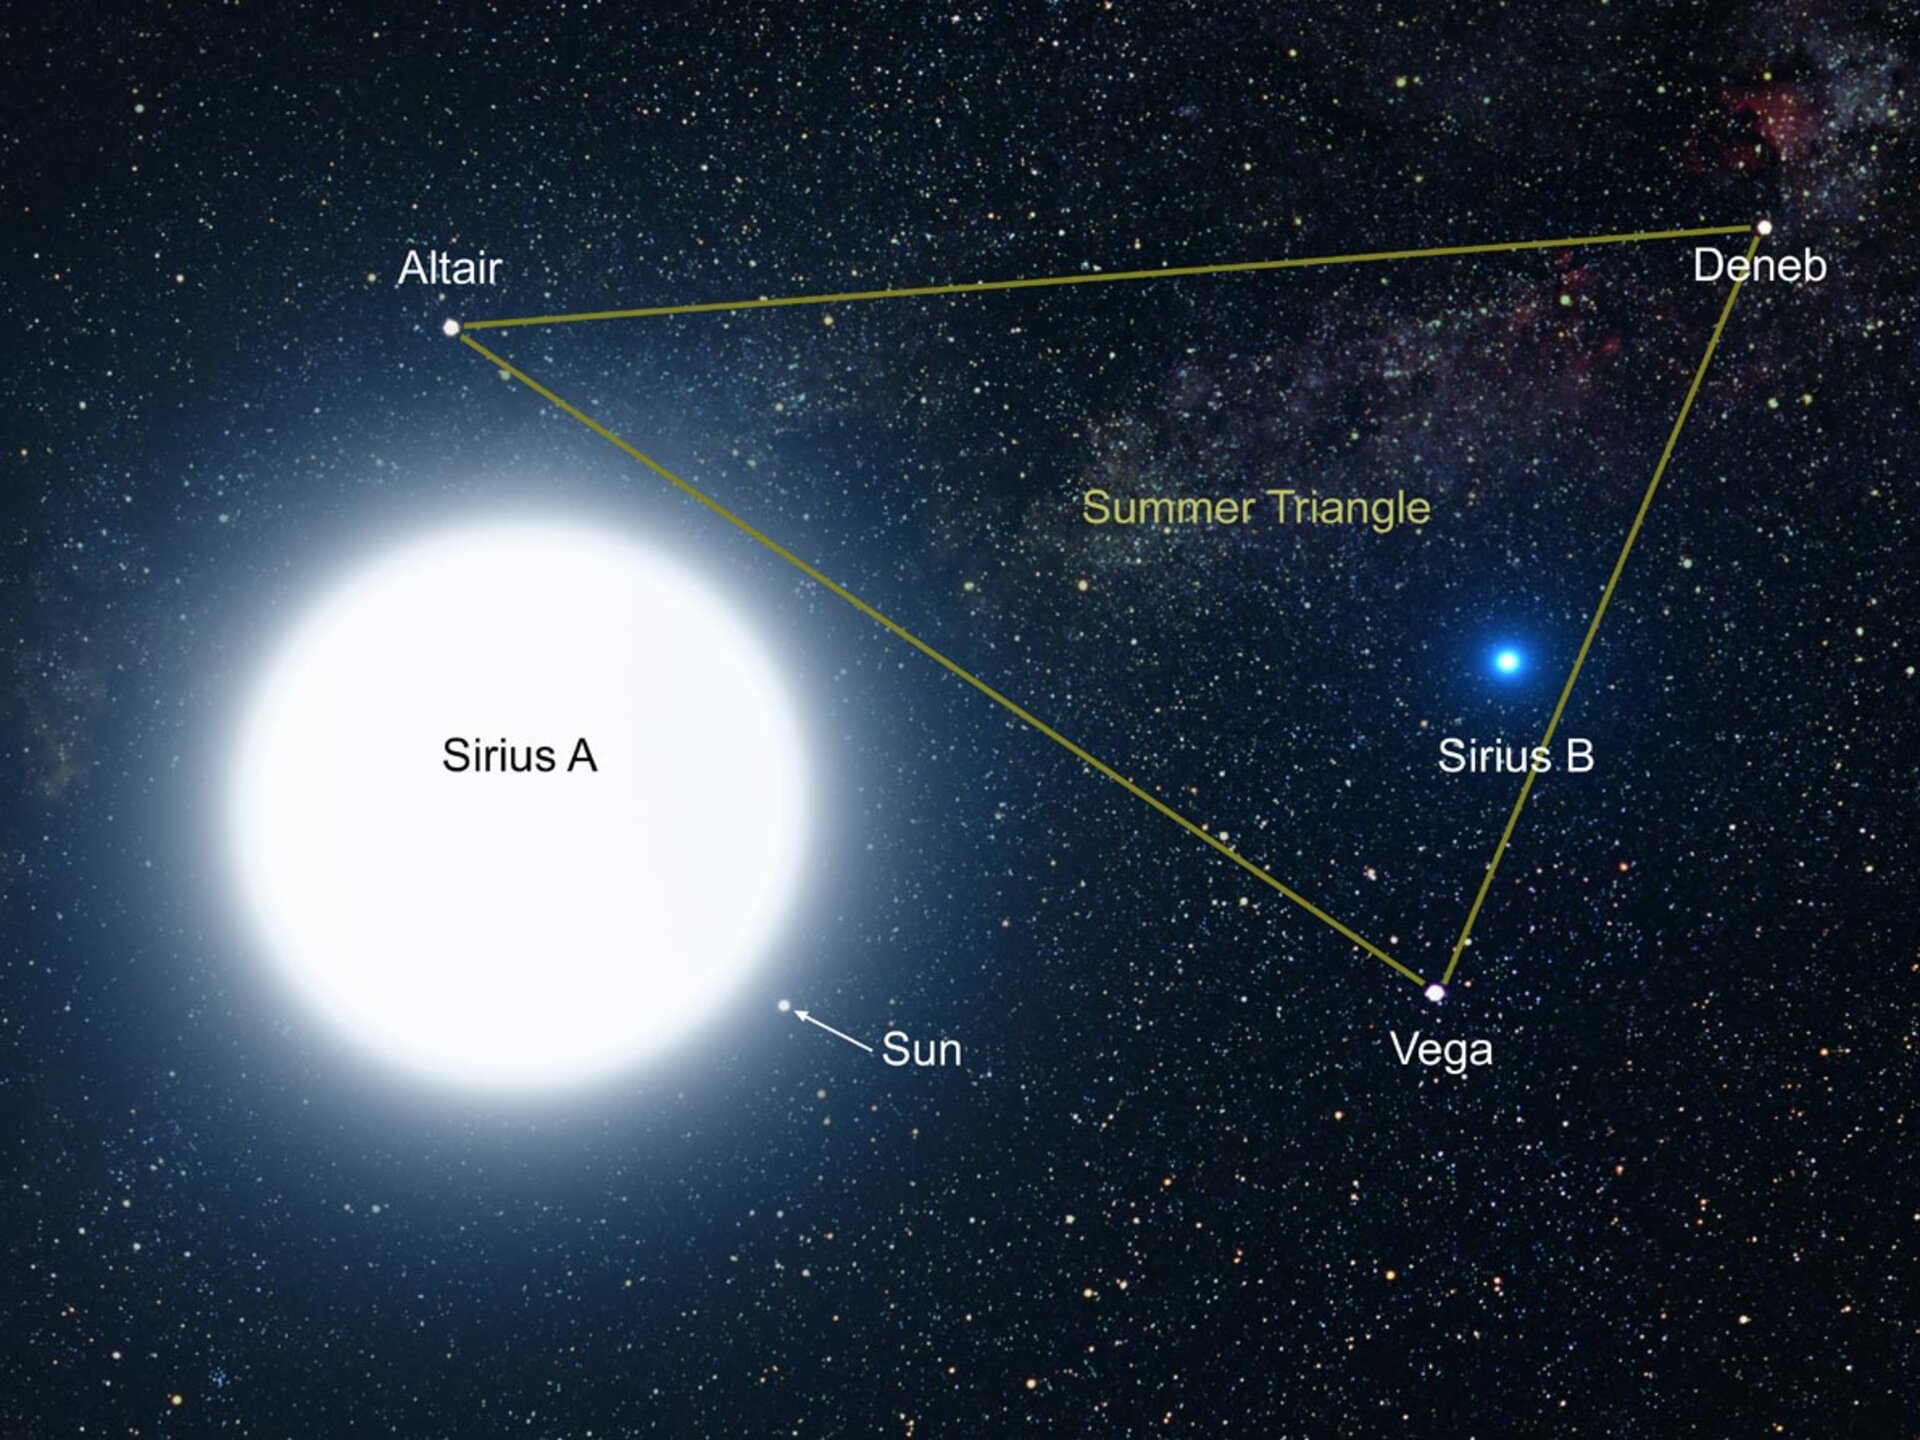 Artist's impression of Sirius A and B, viewed from within their system